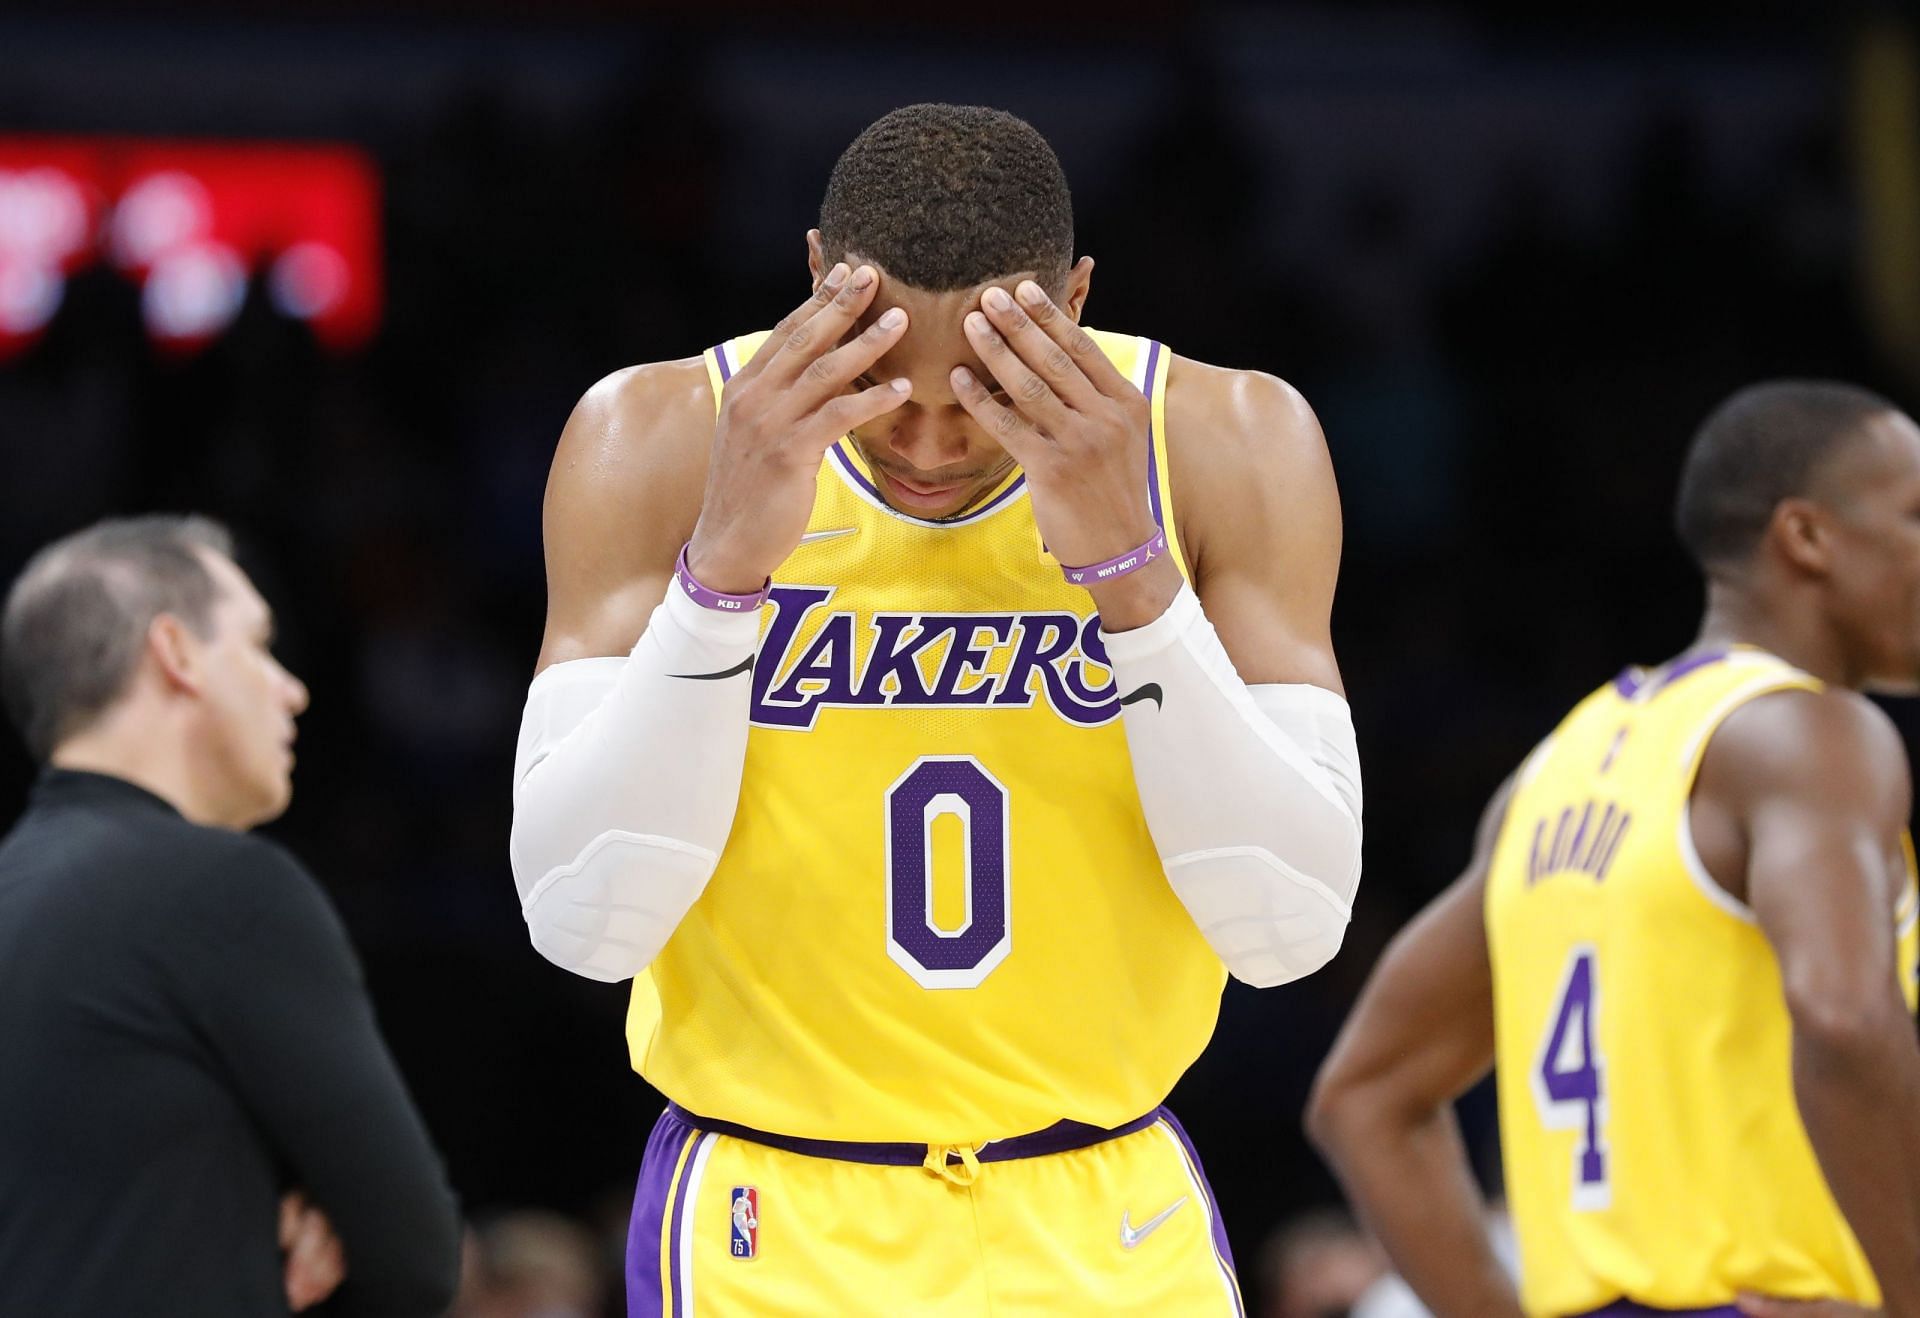 Russell Westbrook has lived up to his turnover-machine reputation for the LA Lakers this season [Photo: FanSided]